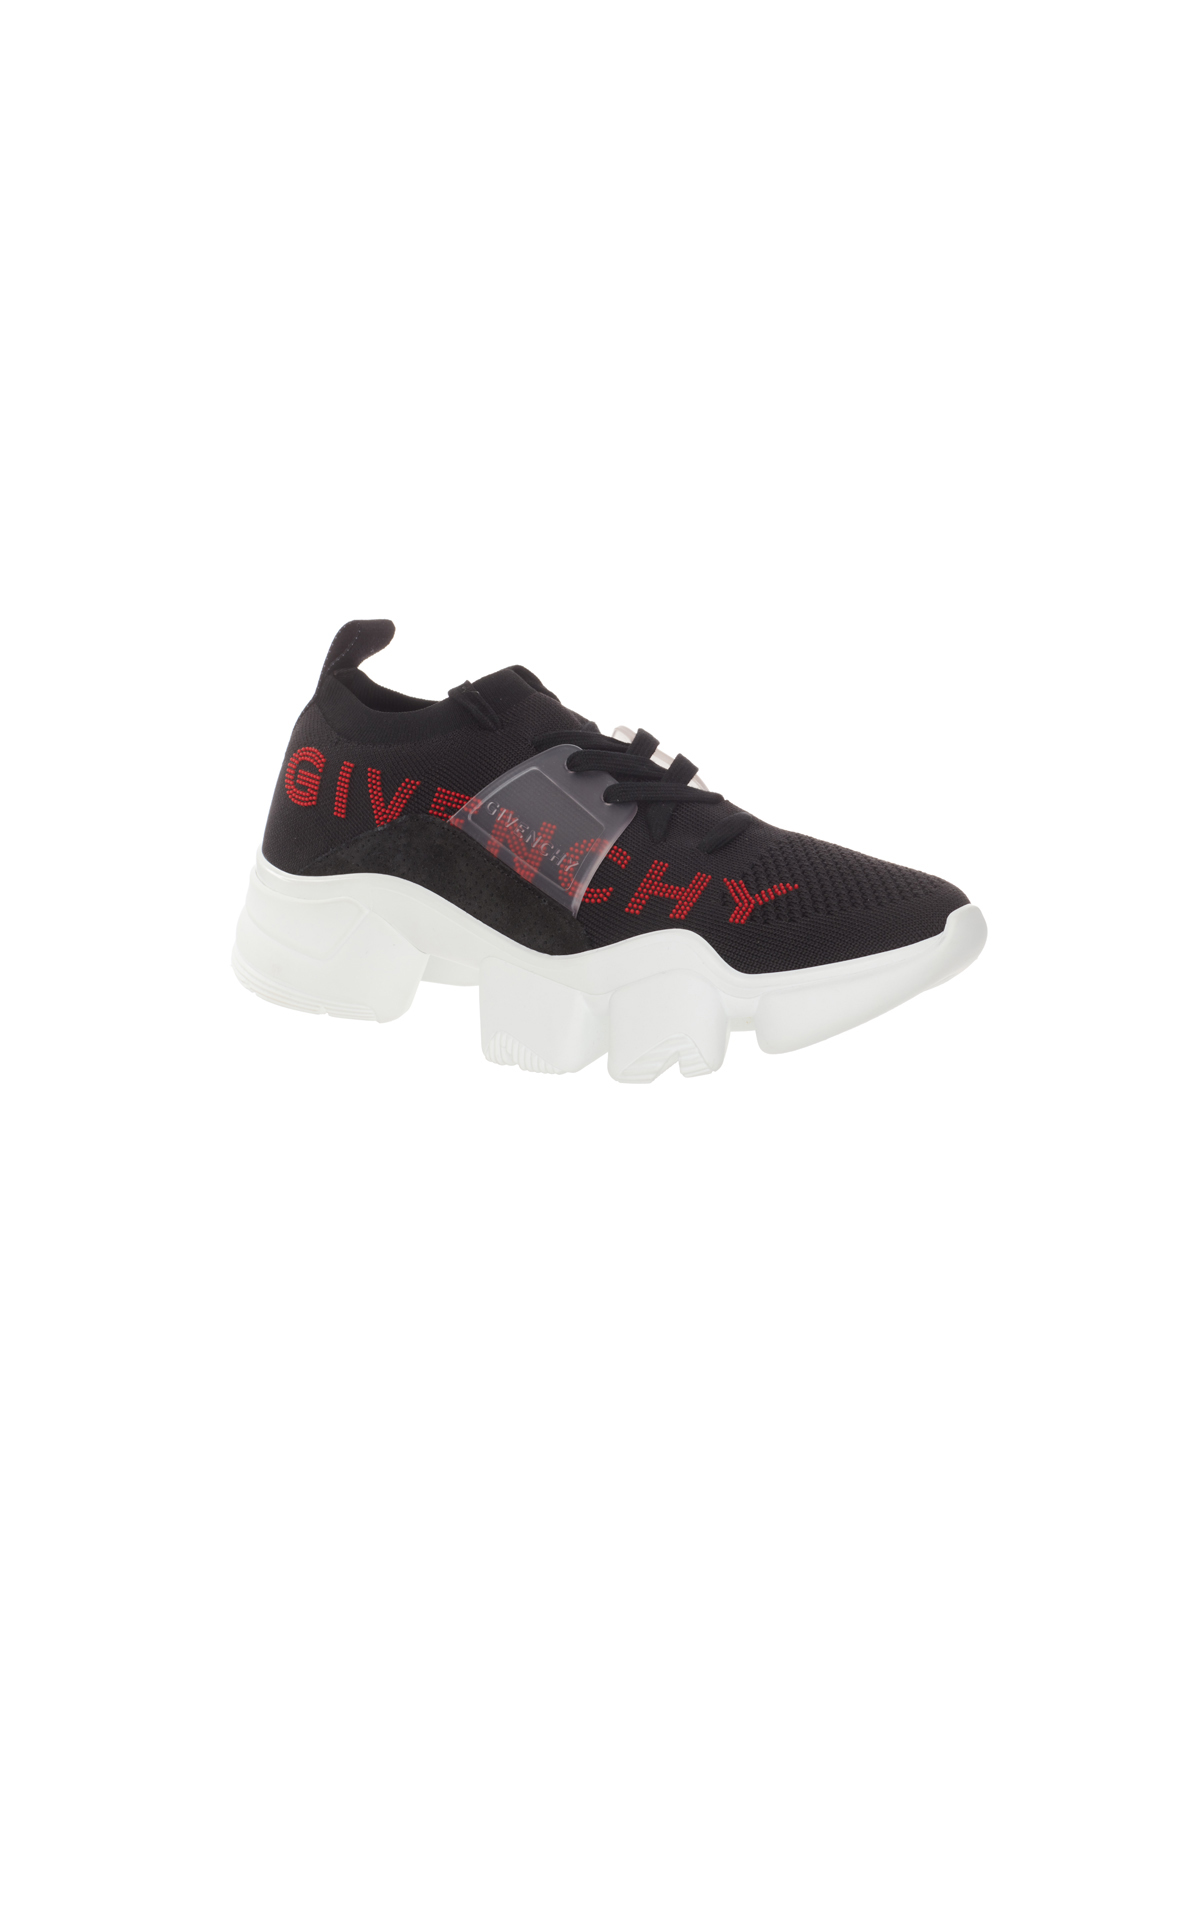 Givenchy Jaw lock sneaker low from Bicester Village